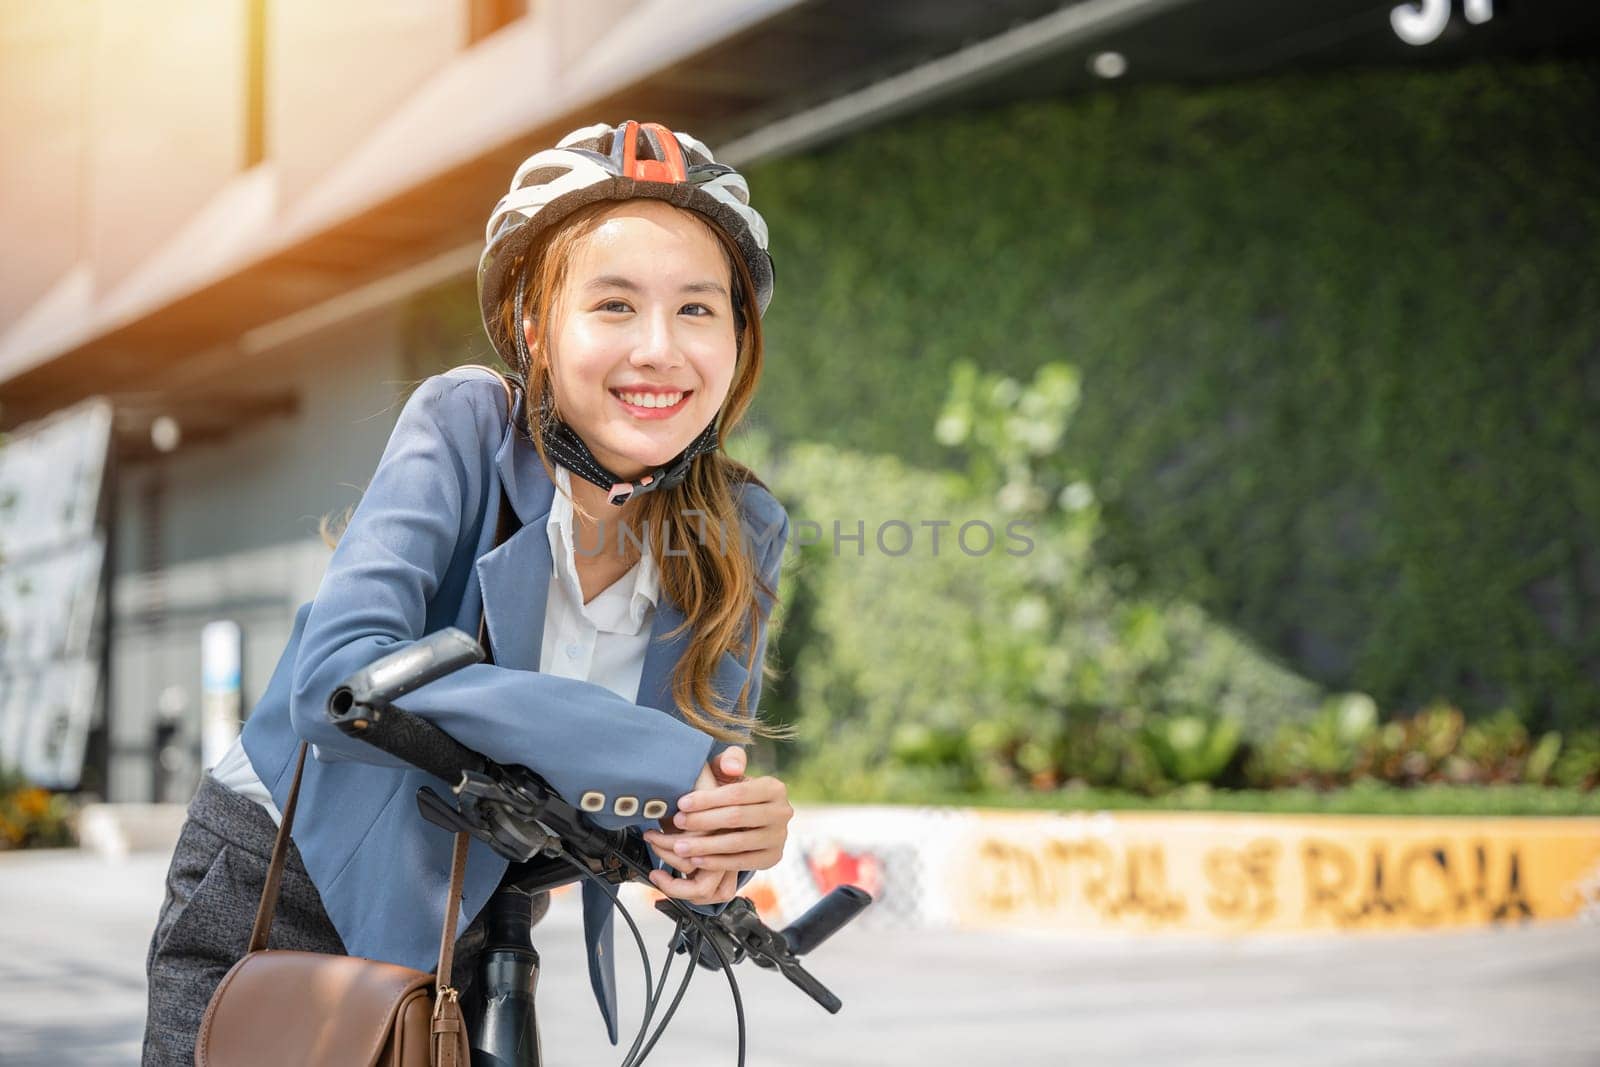 In the city an Asian businesswoman helmeted and in a suit stands with her bicycle ready for a cheerful morning commute to the office. This image combines work and outdoor fun.